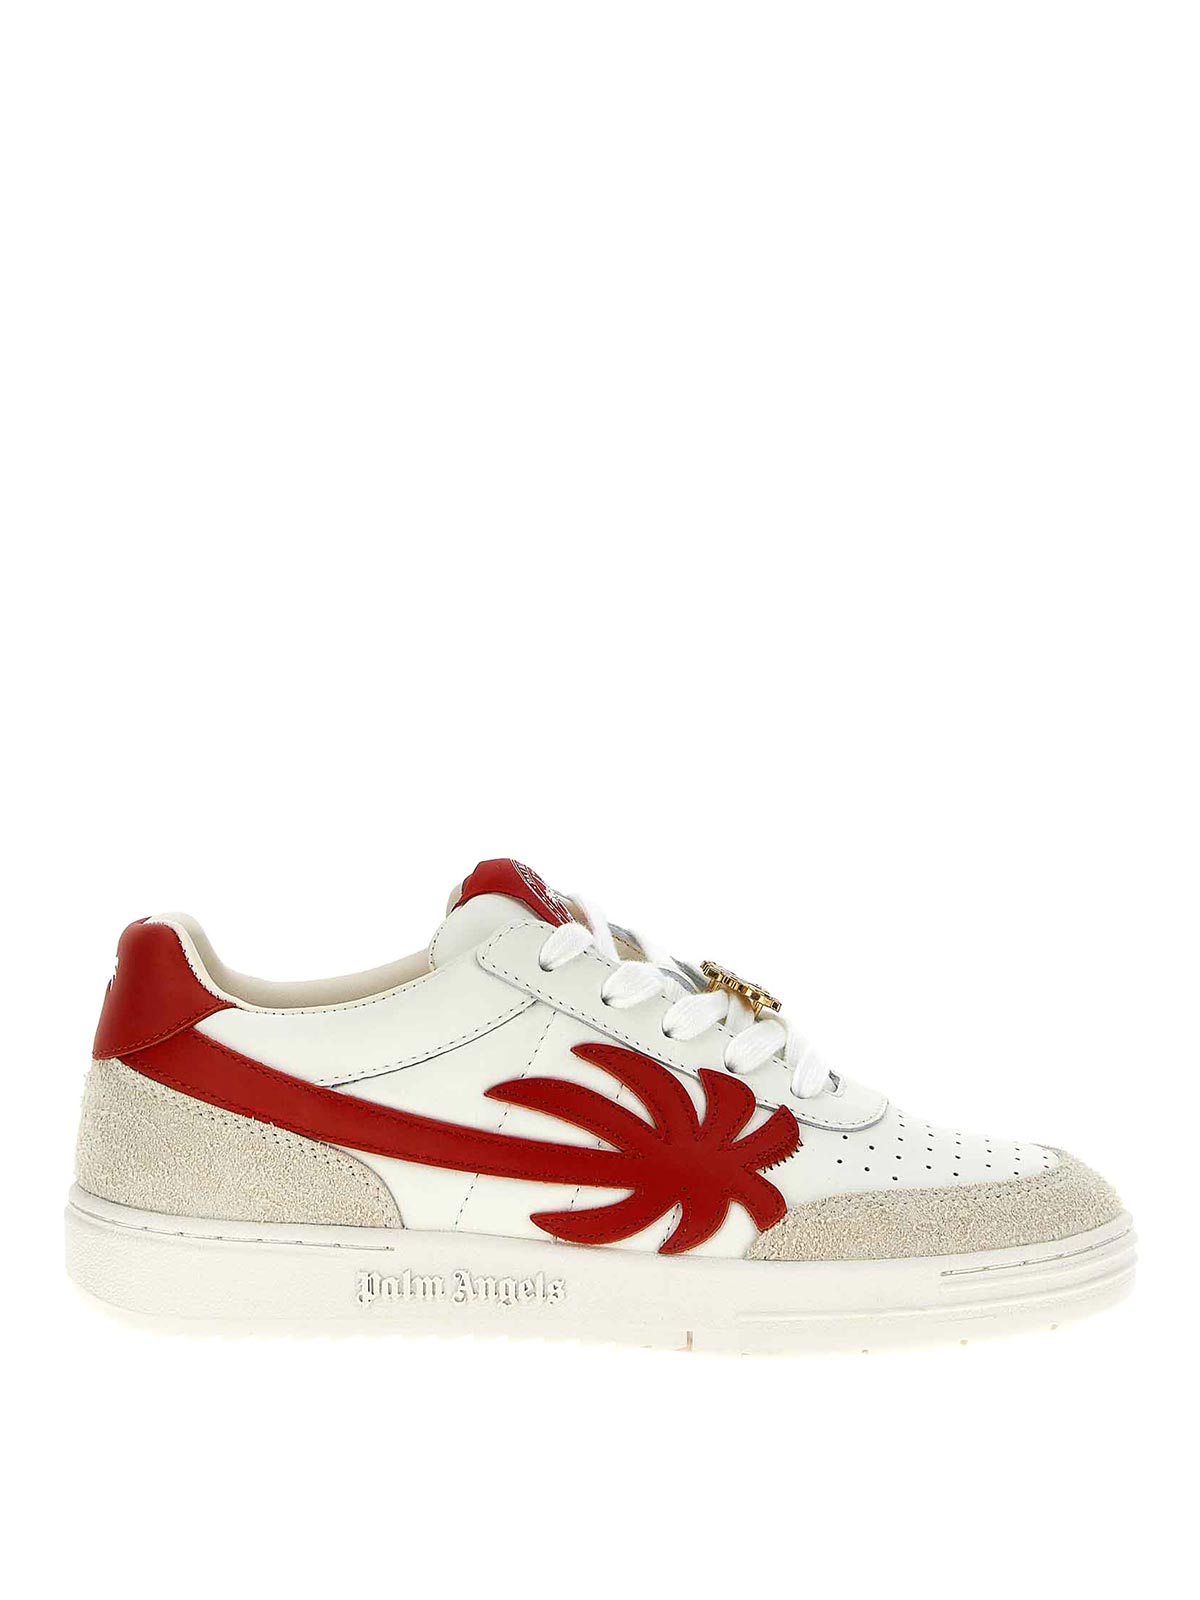 Palm Angels Palm Beach University Sneakers In Red